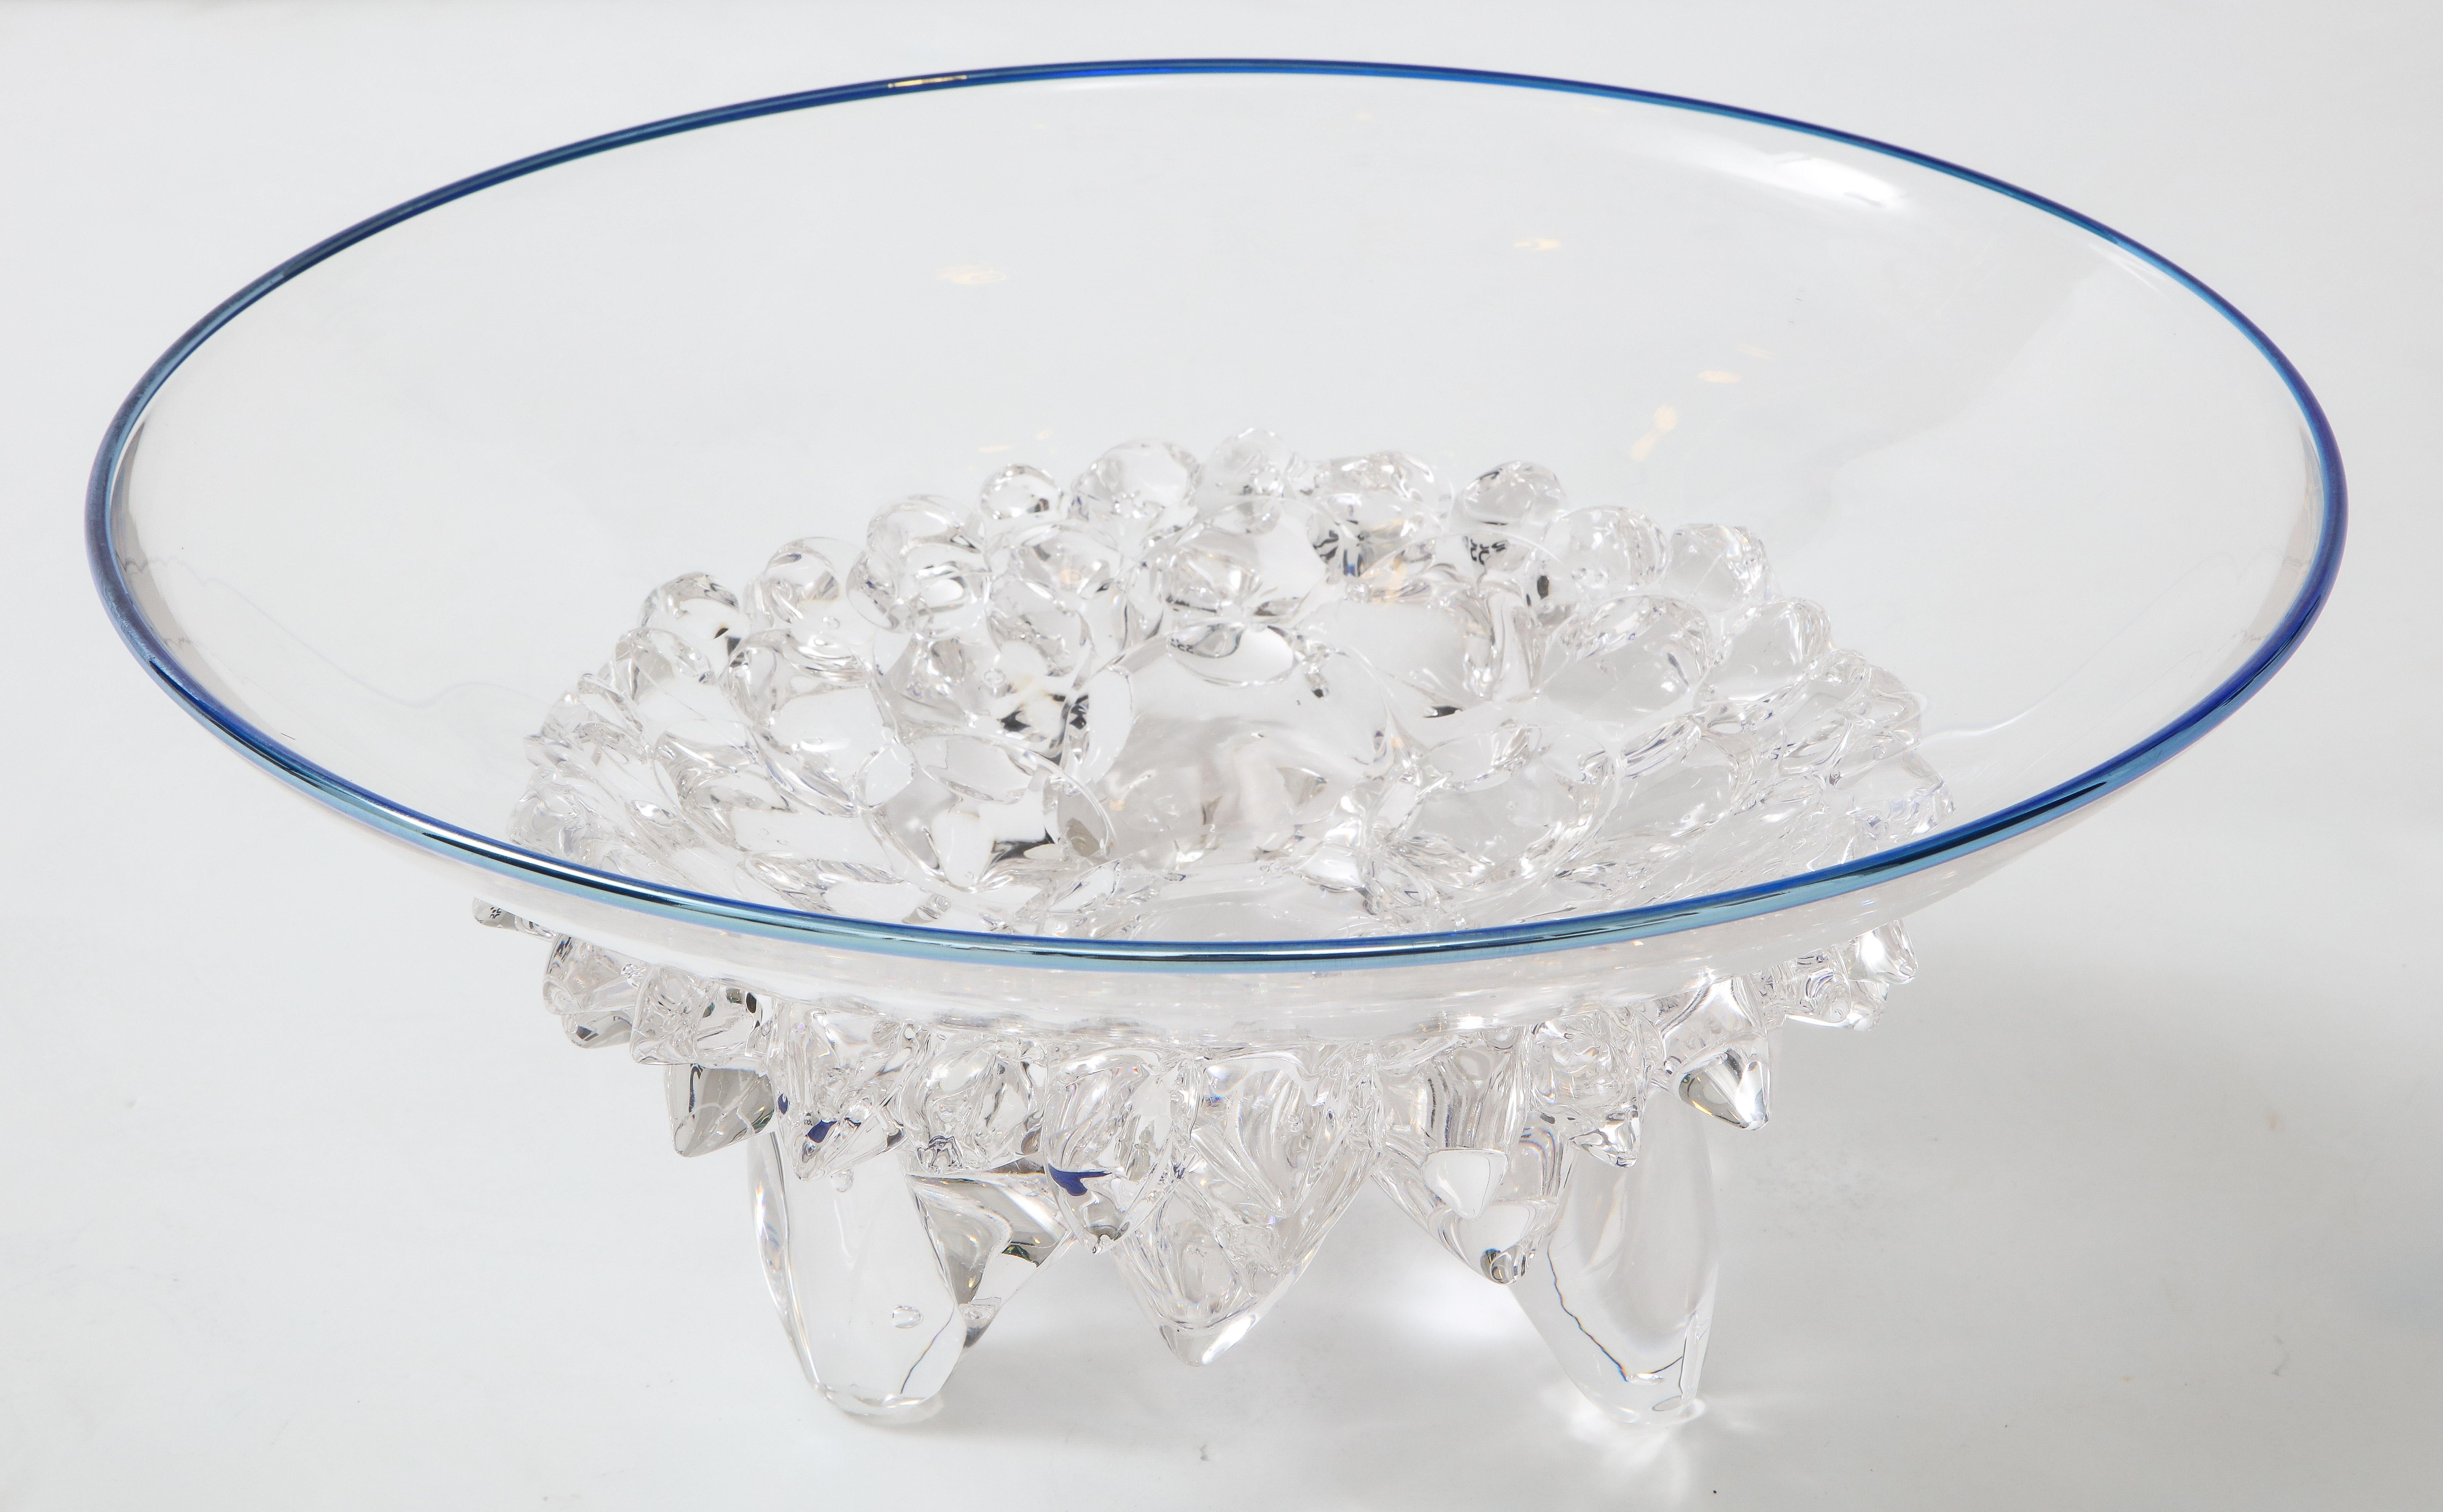 extra large glass bowls for centerpieces